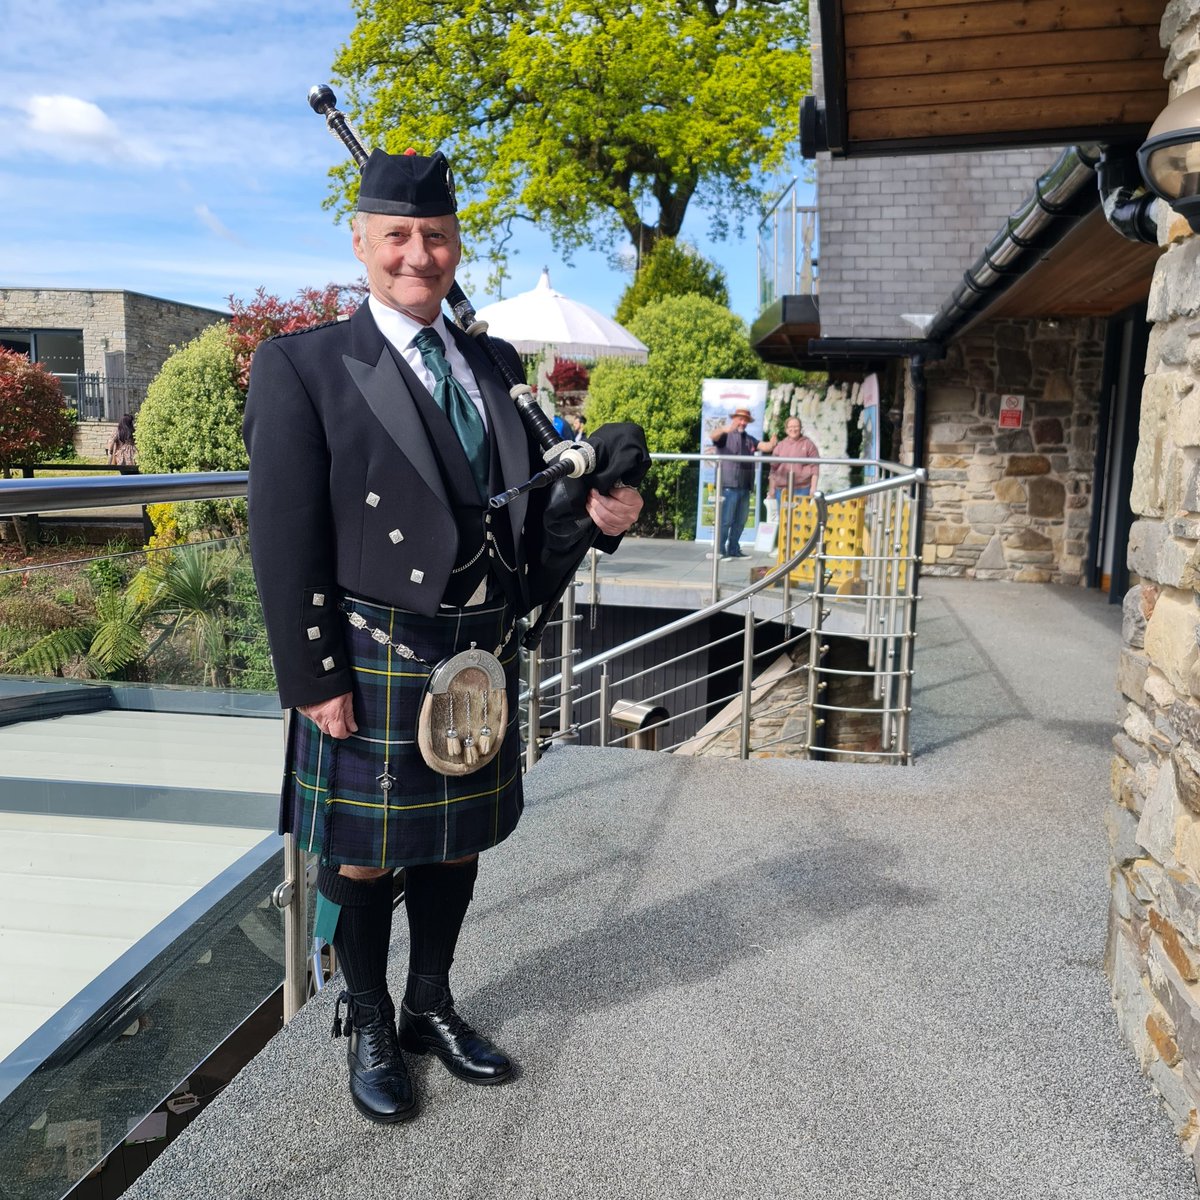 GR8 day today @CanadaLakeLodge with #TheWeddingGuildofWales.  
Thanks Lynne & Steve for yr hard work & couples who came to speak & who booked us :-)

#BagpiperSouthWales #Bagpipes #TaffsWell #TalbotGreen #Llantrisant #Caerphilly #Pencoed #Creigiau #CapelLlanilltern #Nantgarw